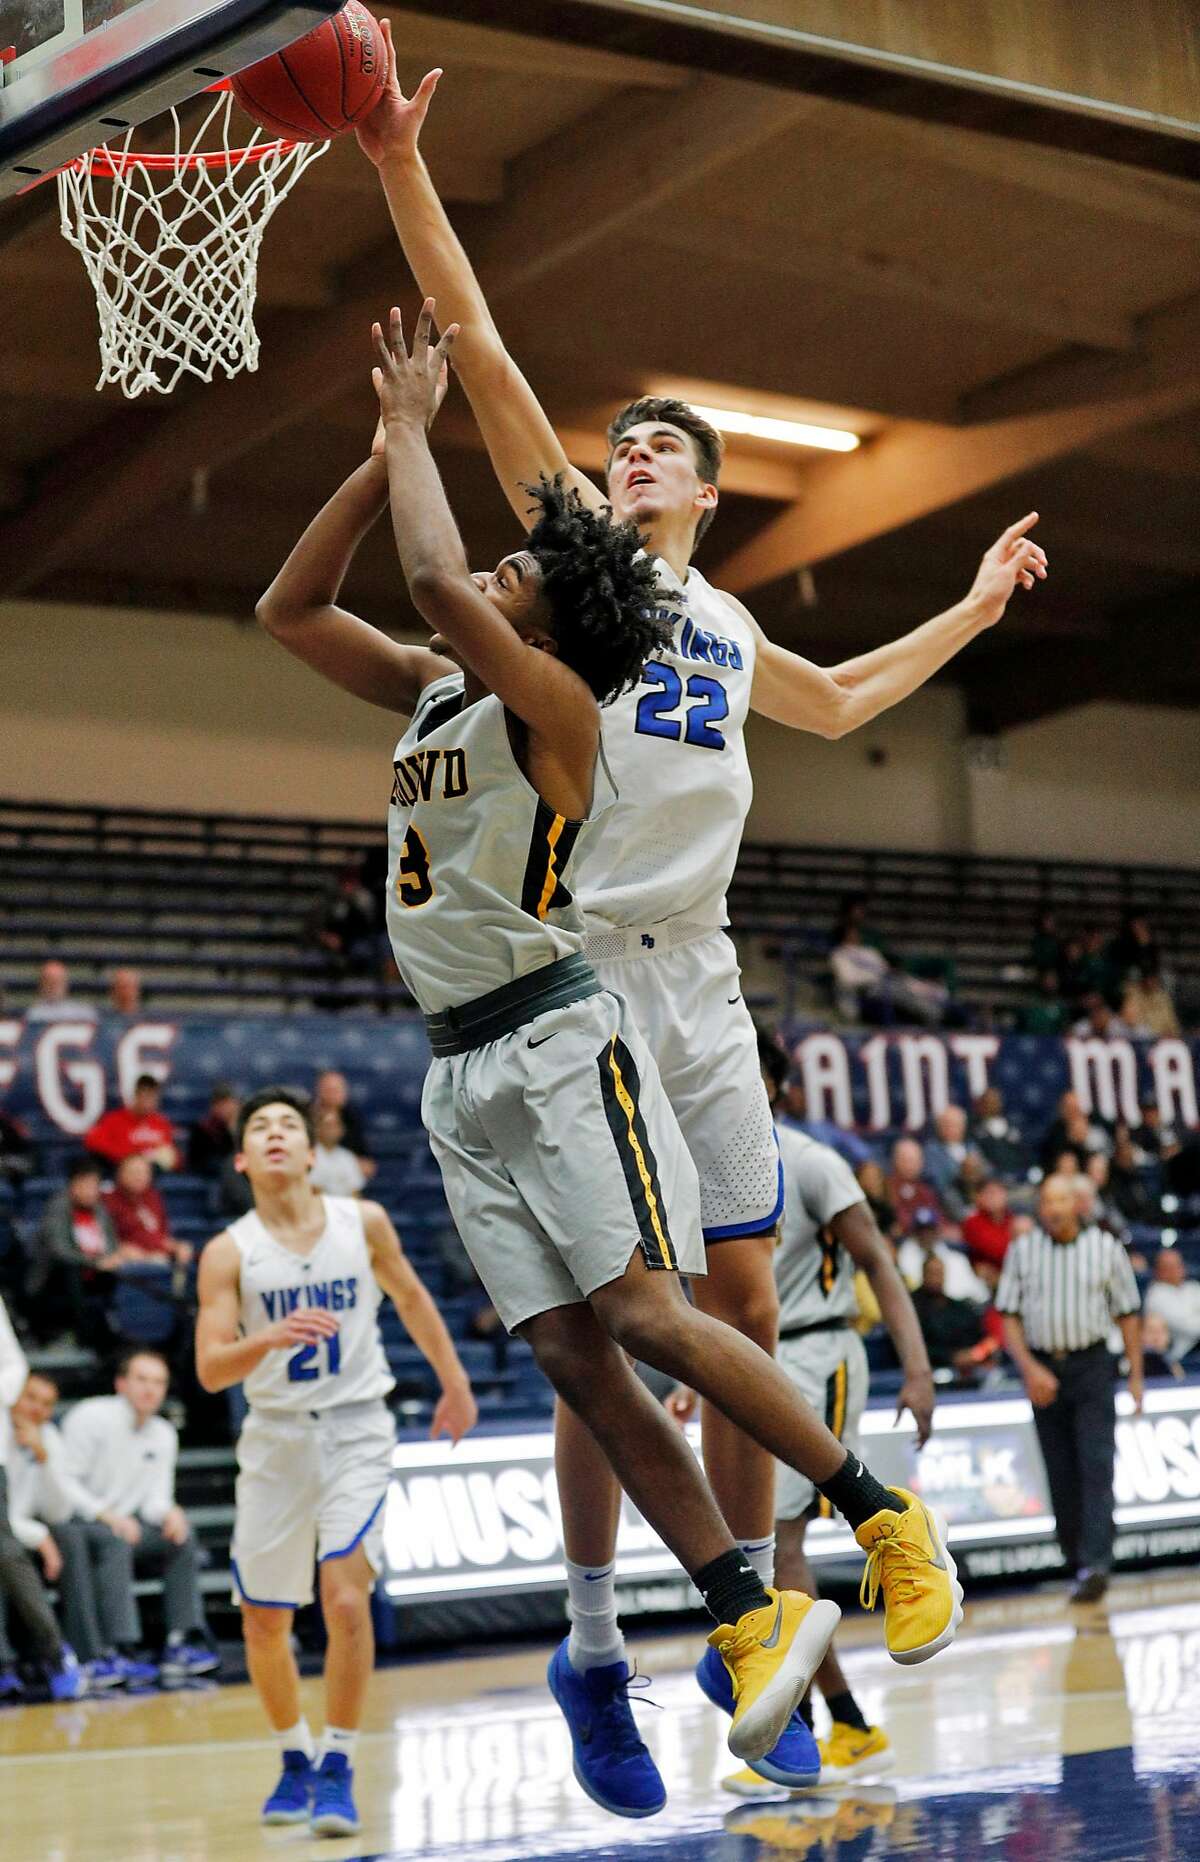 Matt Van Komen (22) blocks a shot by Brendan Patrick (3) in the first half as the Bishop O'Dowd Dragons played the Pleasant Grove (Utah) Vikings at the Martin Luther King, Jr. Classic at St. Mary's College in Moraga, Calif., on Monday, January 15, 2018.